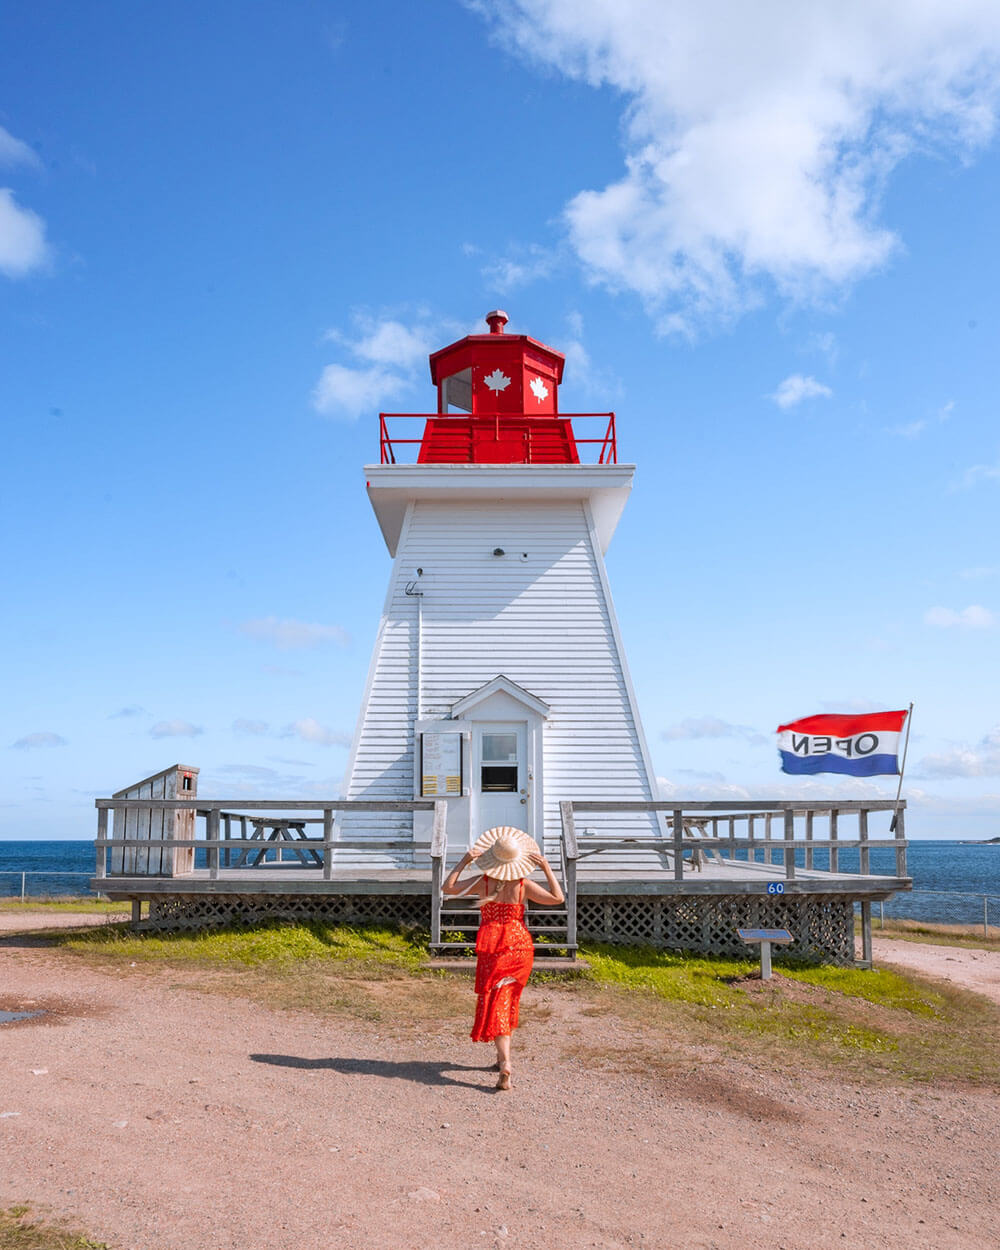 Planning a trip to Cape Breton soon? This guide includes all of the best things to do in Cape Breton Island! From activities and attractions, to the top restaurants, hikes, and all the things you'll want to see along the famous Cabot Trial. You won't want to miss this guide that will help you plan the perfect getaway to Cape Breton. Click for the full list. Pictured here: Neil's Harbour Lighthouse